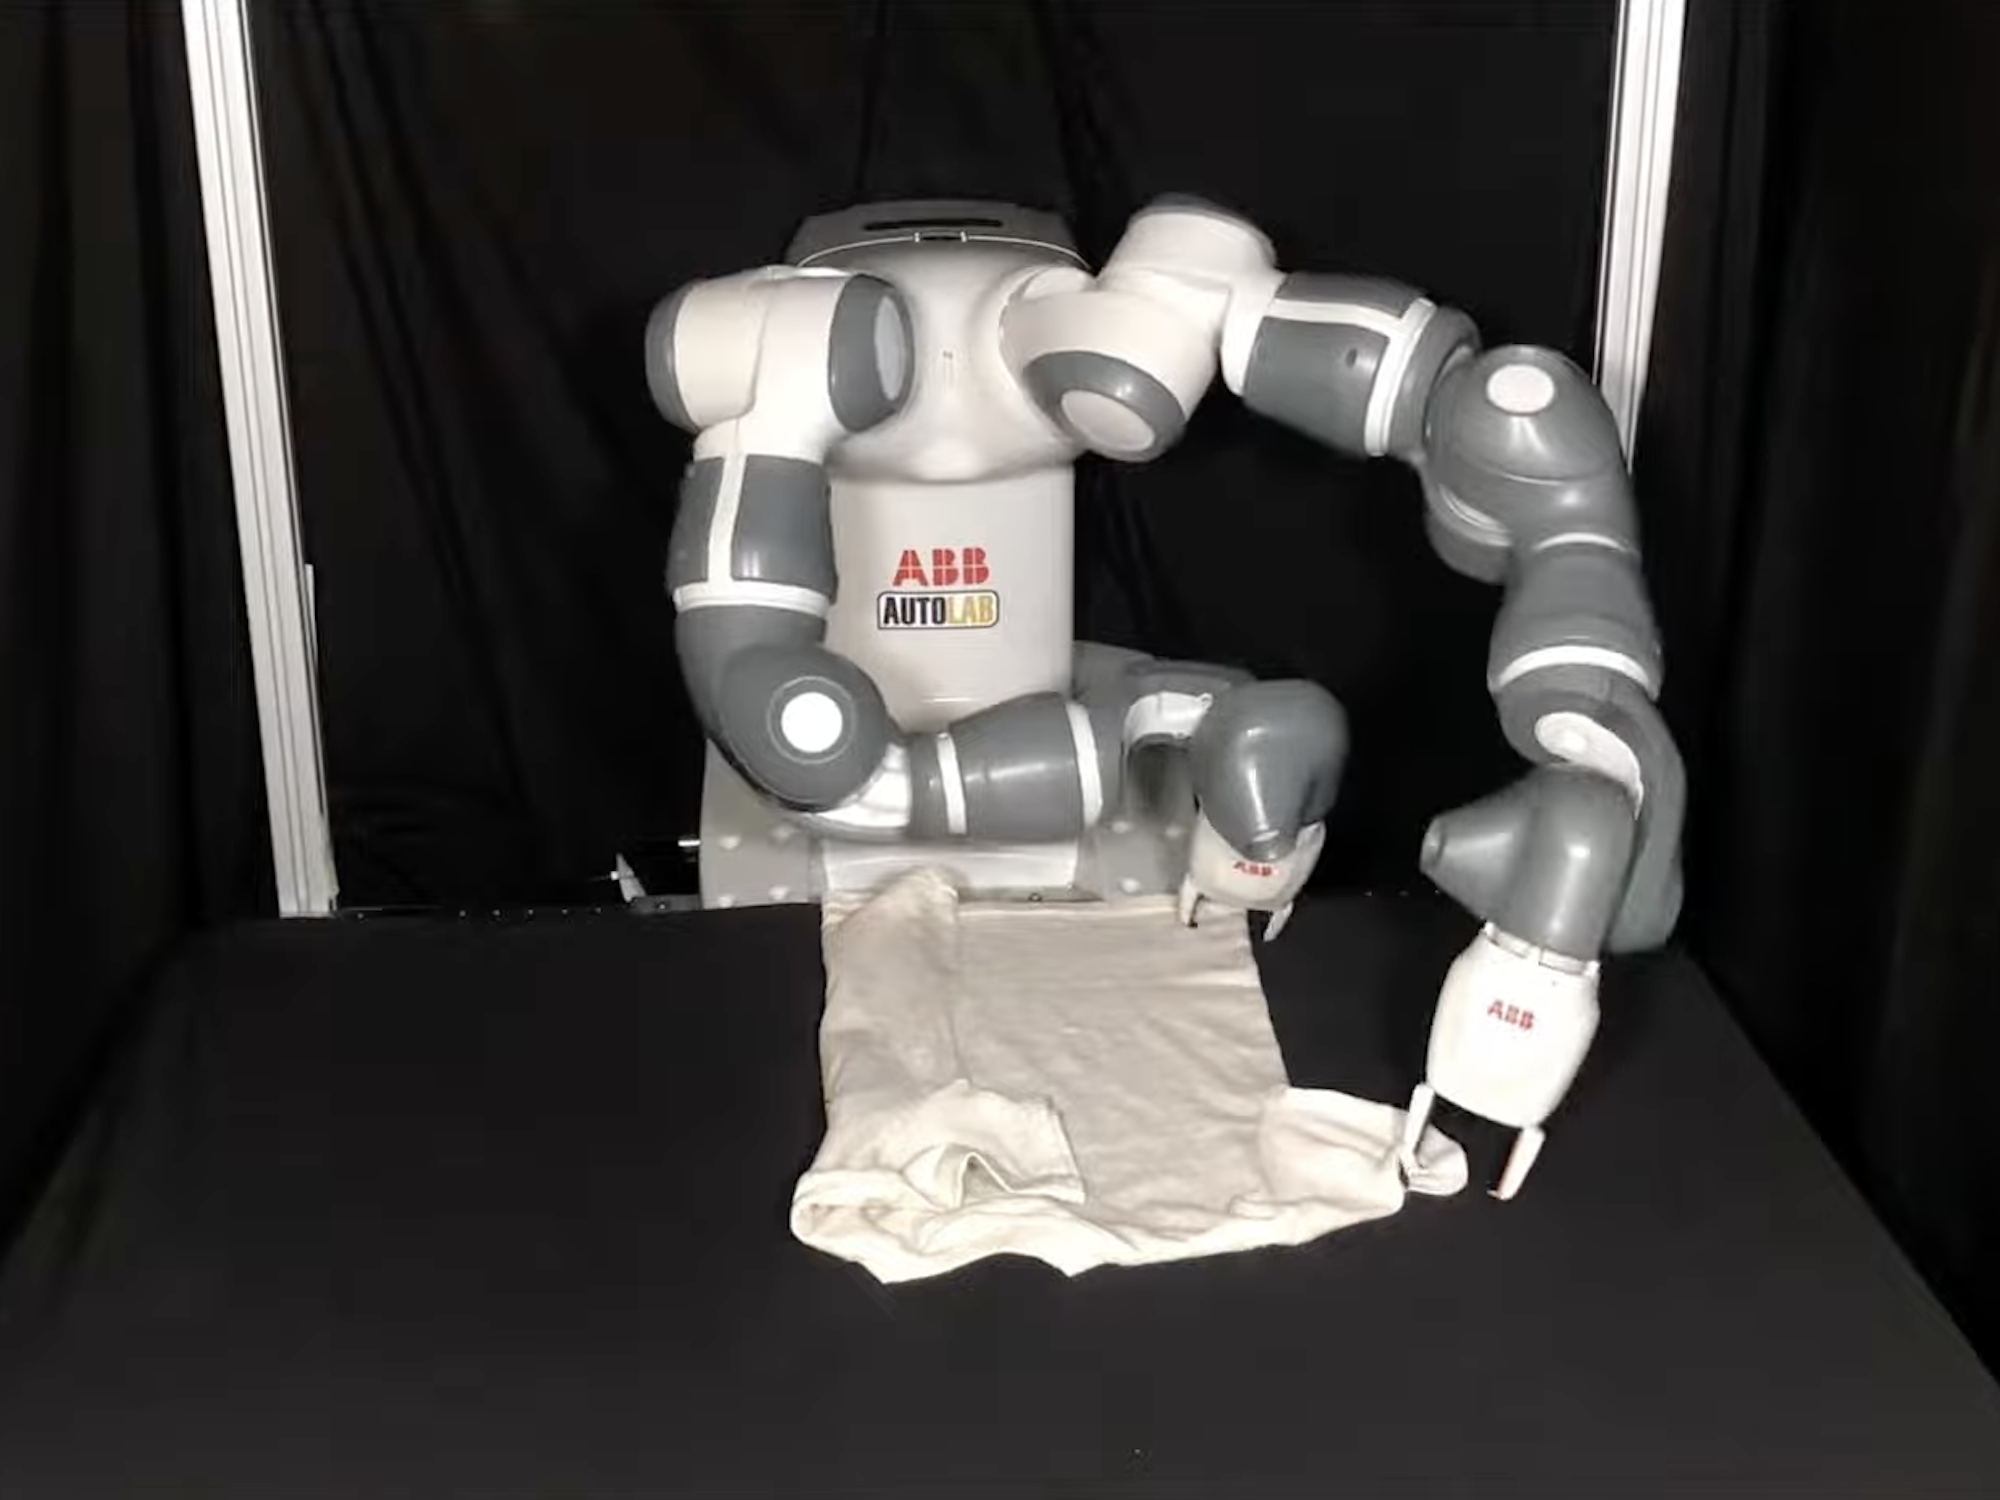 It's the New Year and you're getting laundry-folding robots